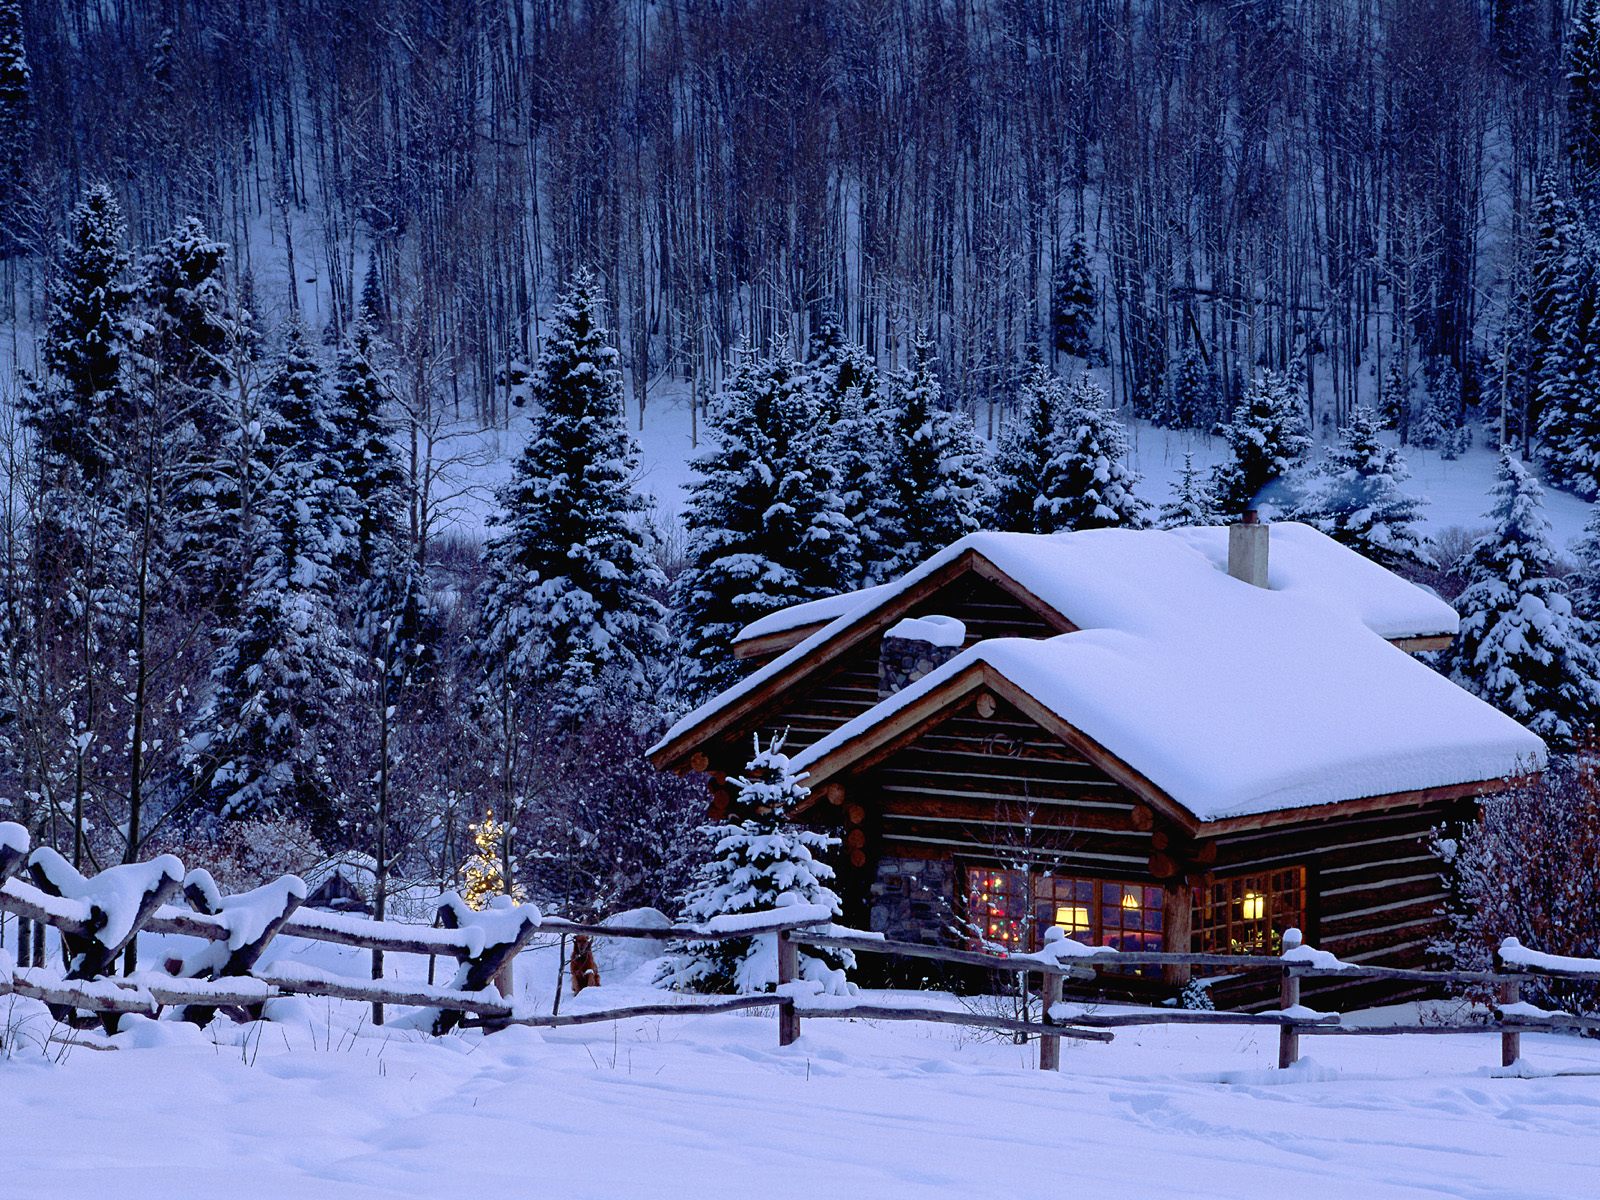 country christmas wallpaper,snow,winter,home,log cabin,tree